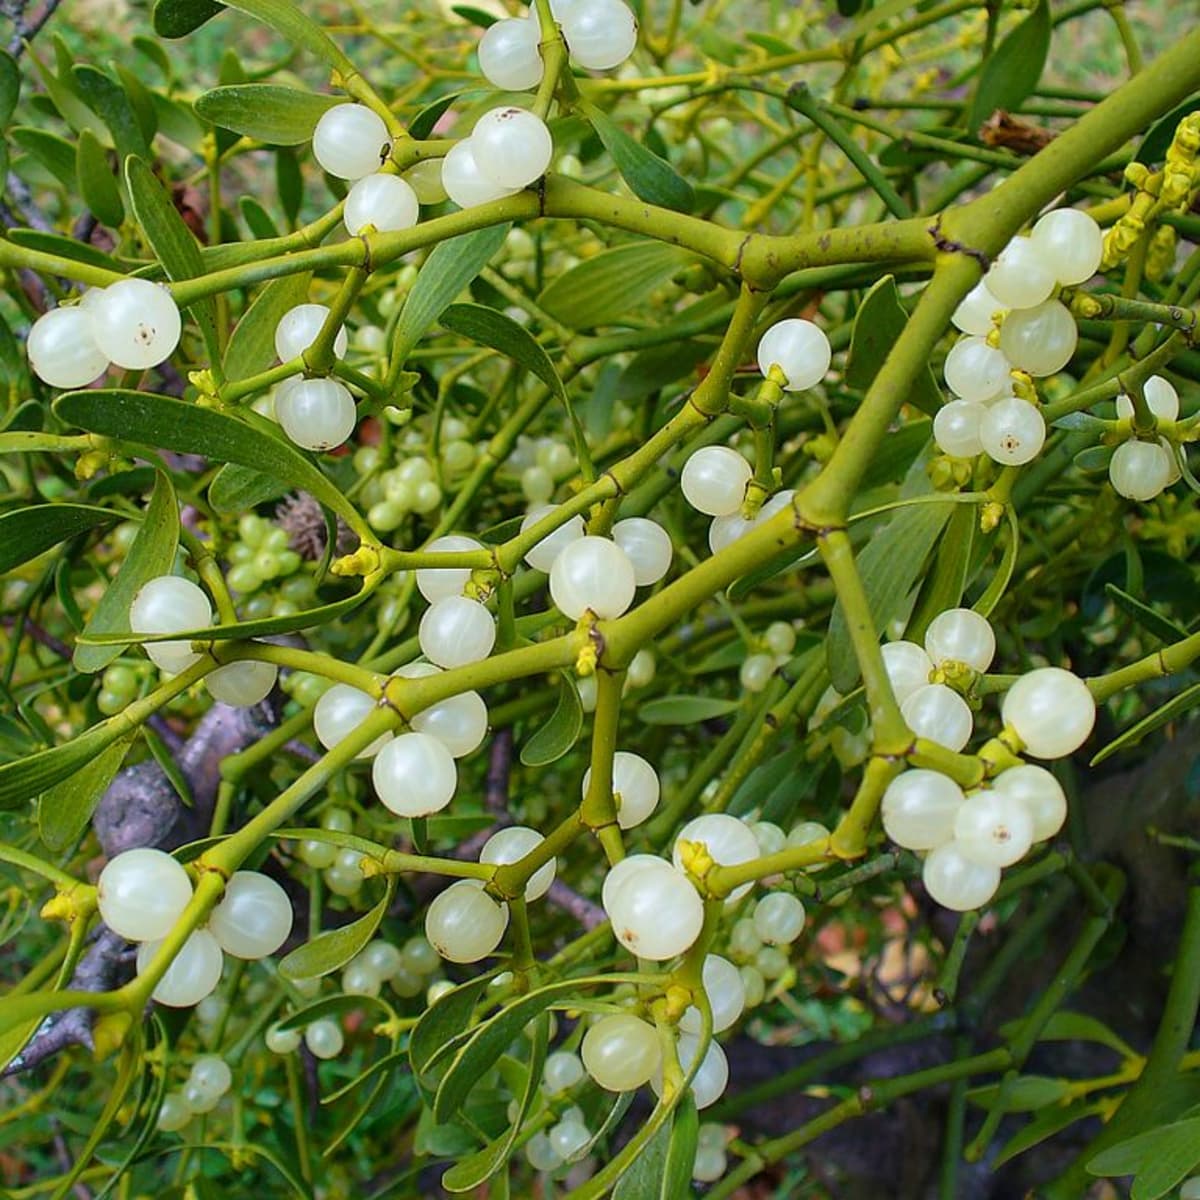 anush galoyan recommends images of mistletoe pic